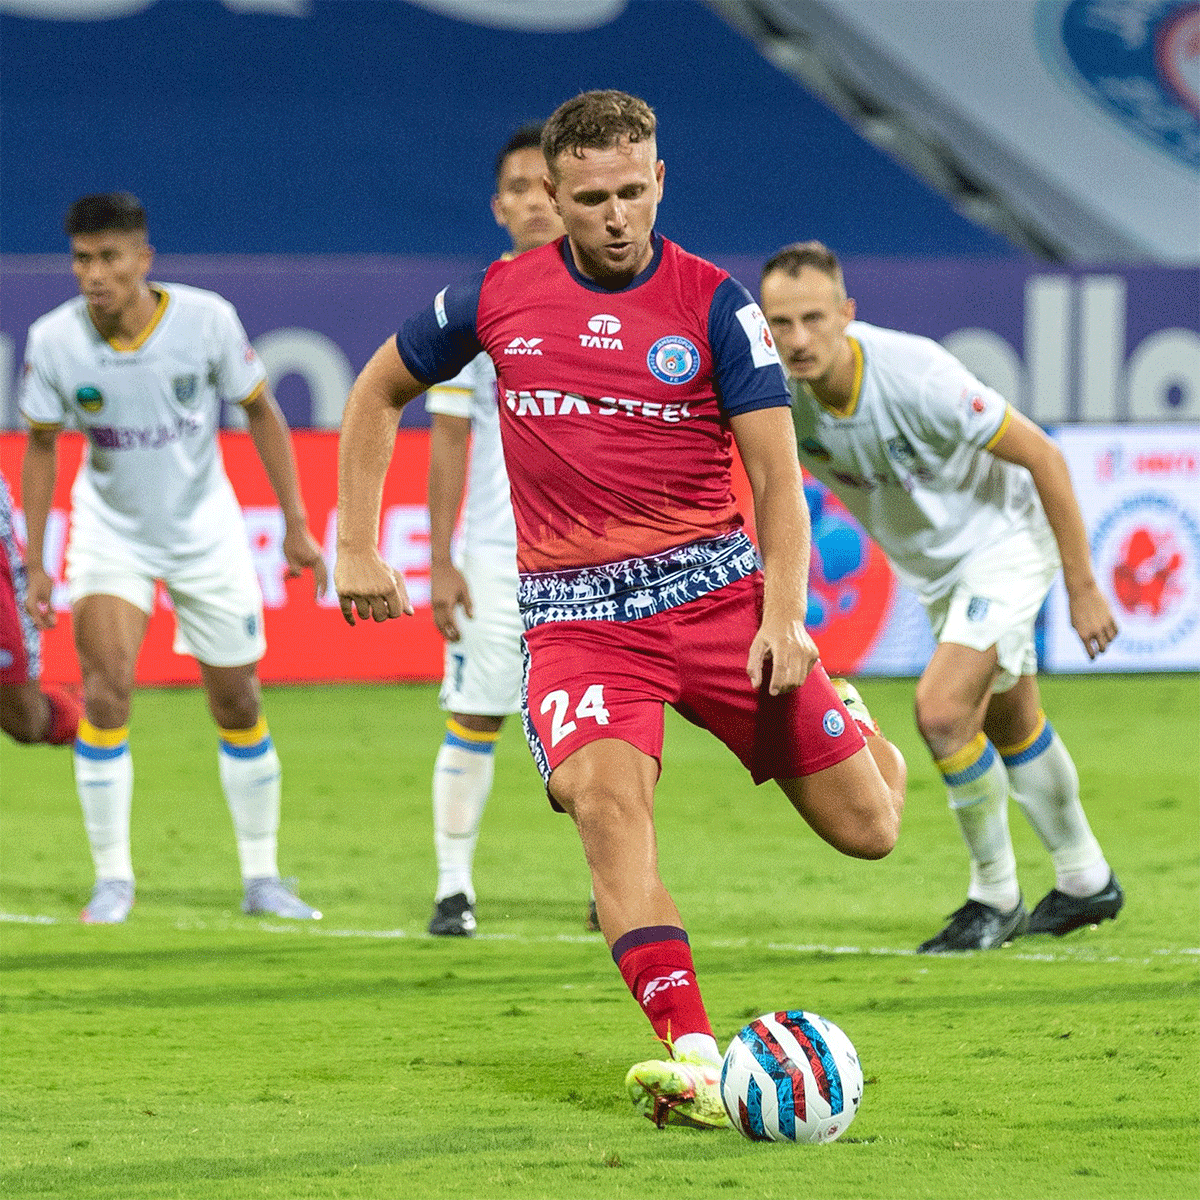 Jamshedpur FC's Greg Stewart scores from the spot to help his team take the lead against Kerala Blasters during their ISL match in Bambolim on Thursday